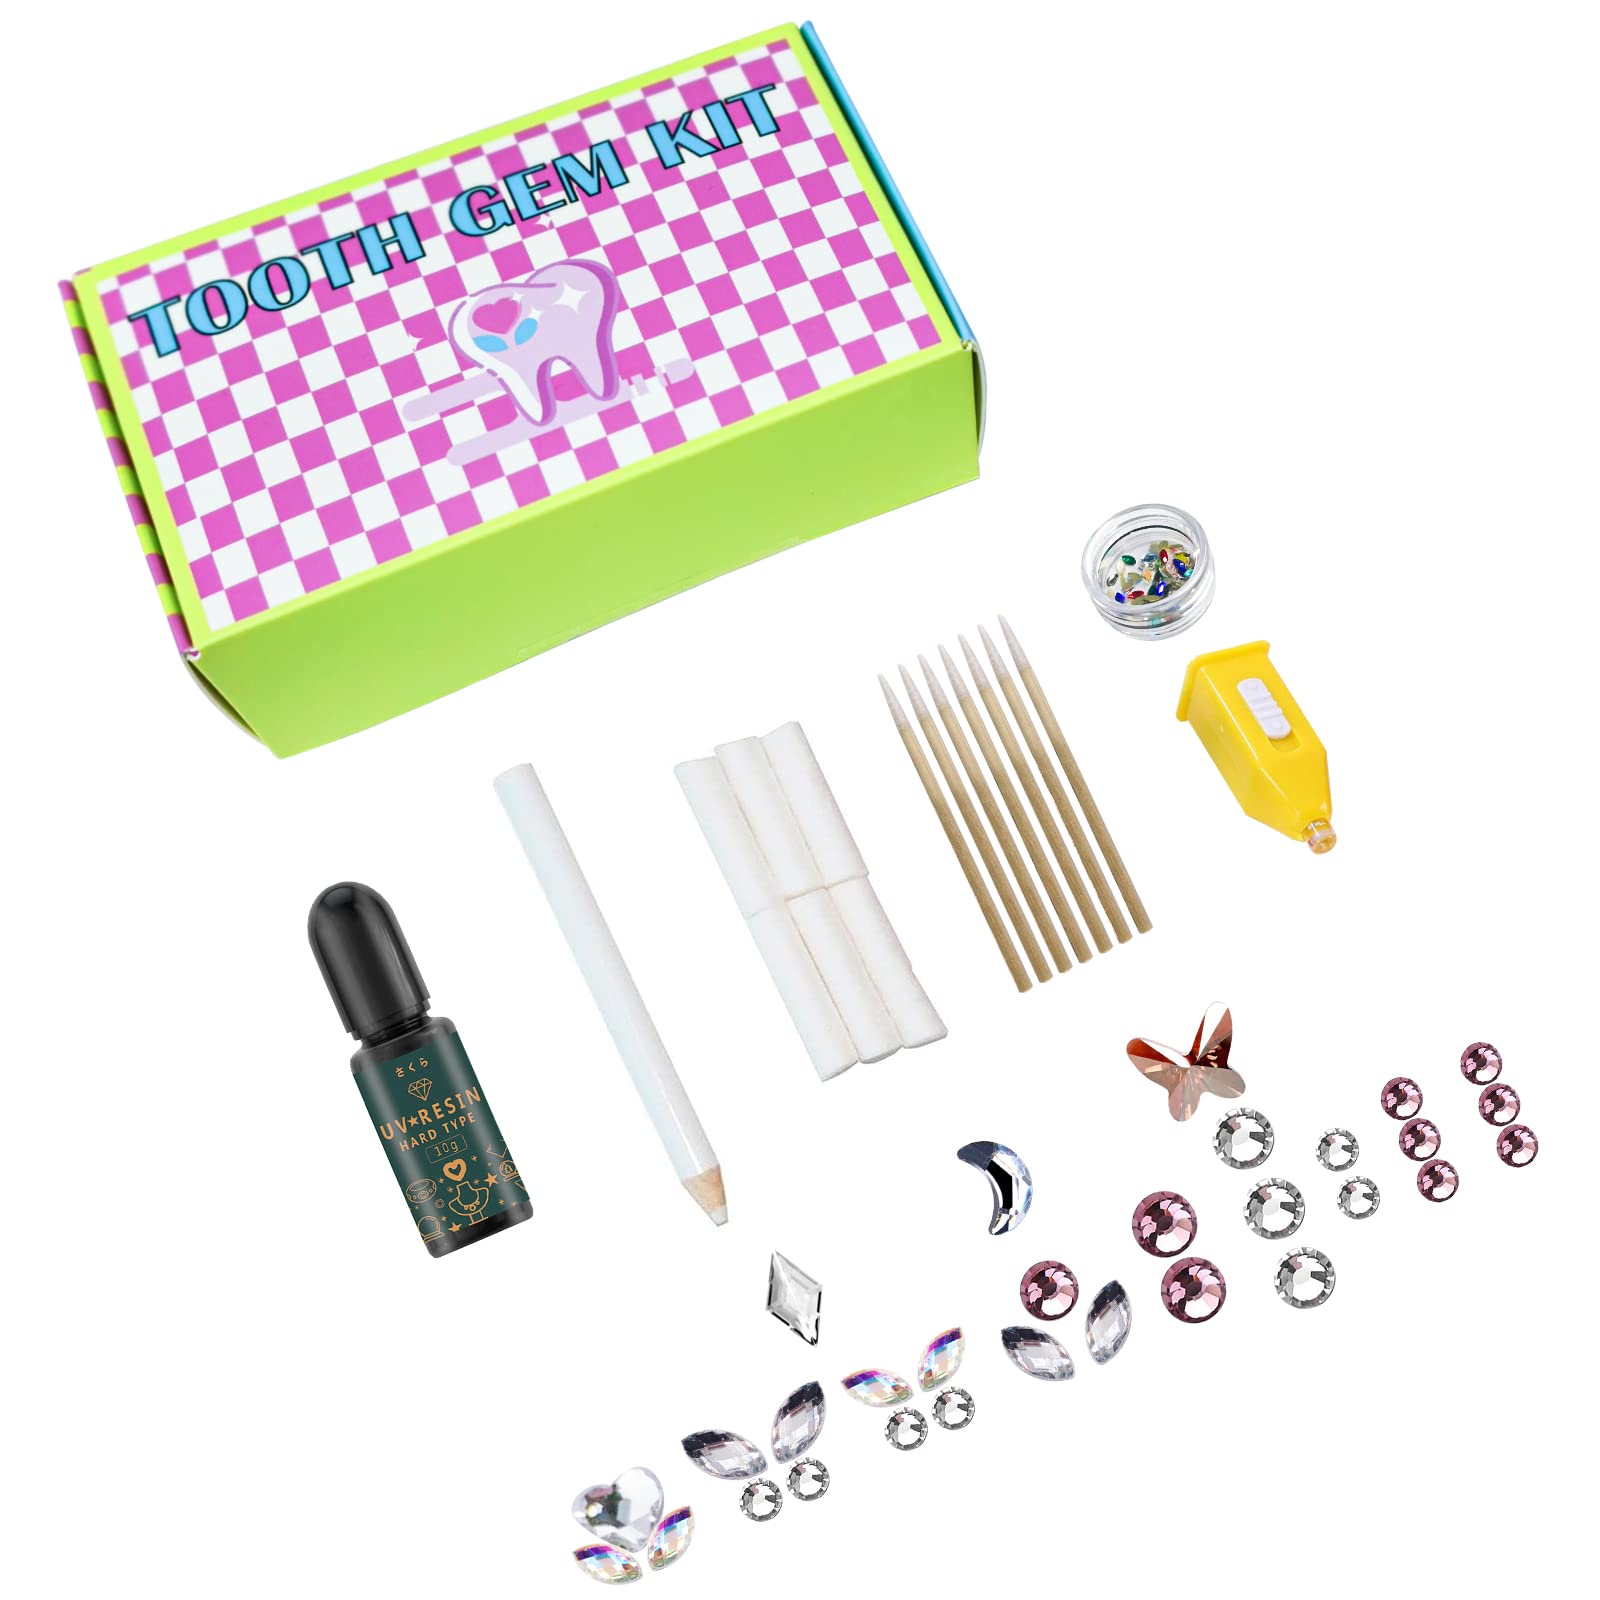 NOTYAZ Tooth Gem Kit Teeth Gems Kit with Glue and Light DIY Teeth Jewelry  Starter Kit 30Pcs Crystals Butterfly & Tulip/Heart-Shaped Gems Great Tooth  Jewelry Gems Kit huncai-1pcs